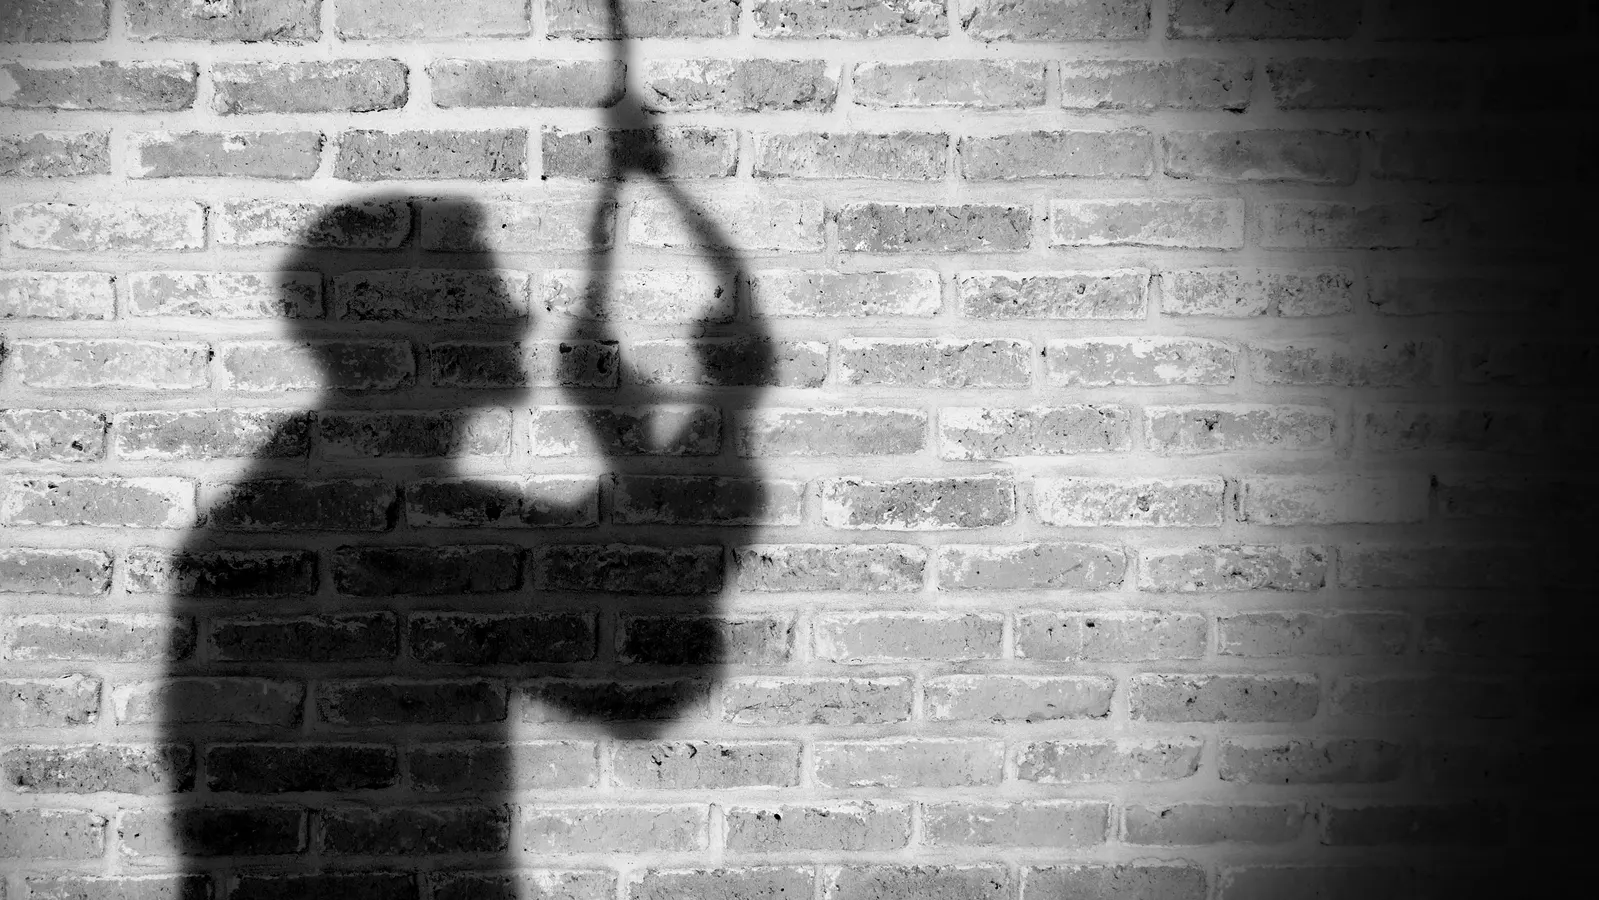 Another student committed suicide in Iran